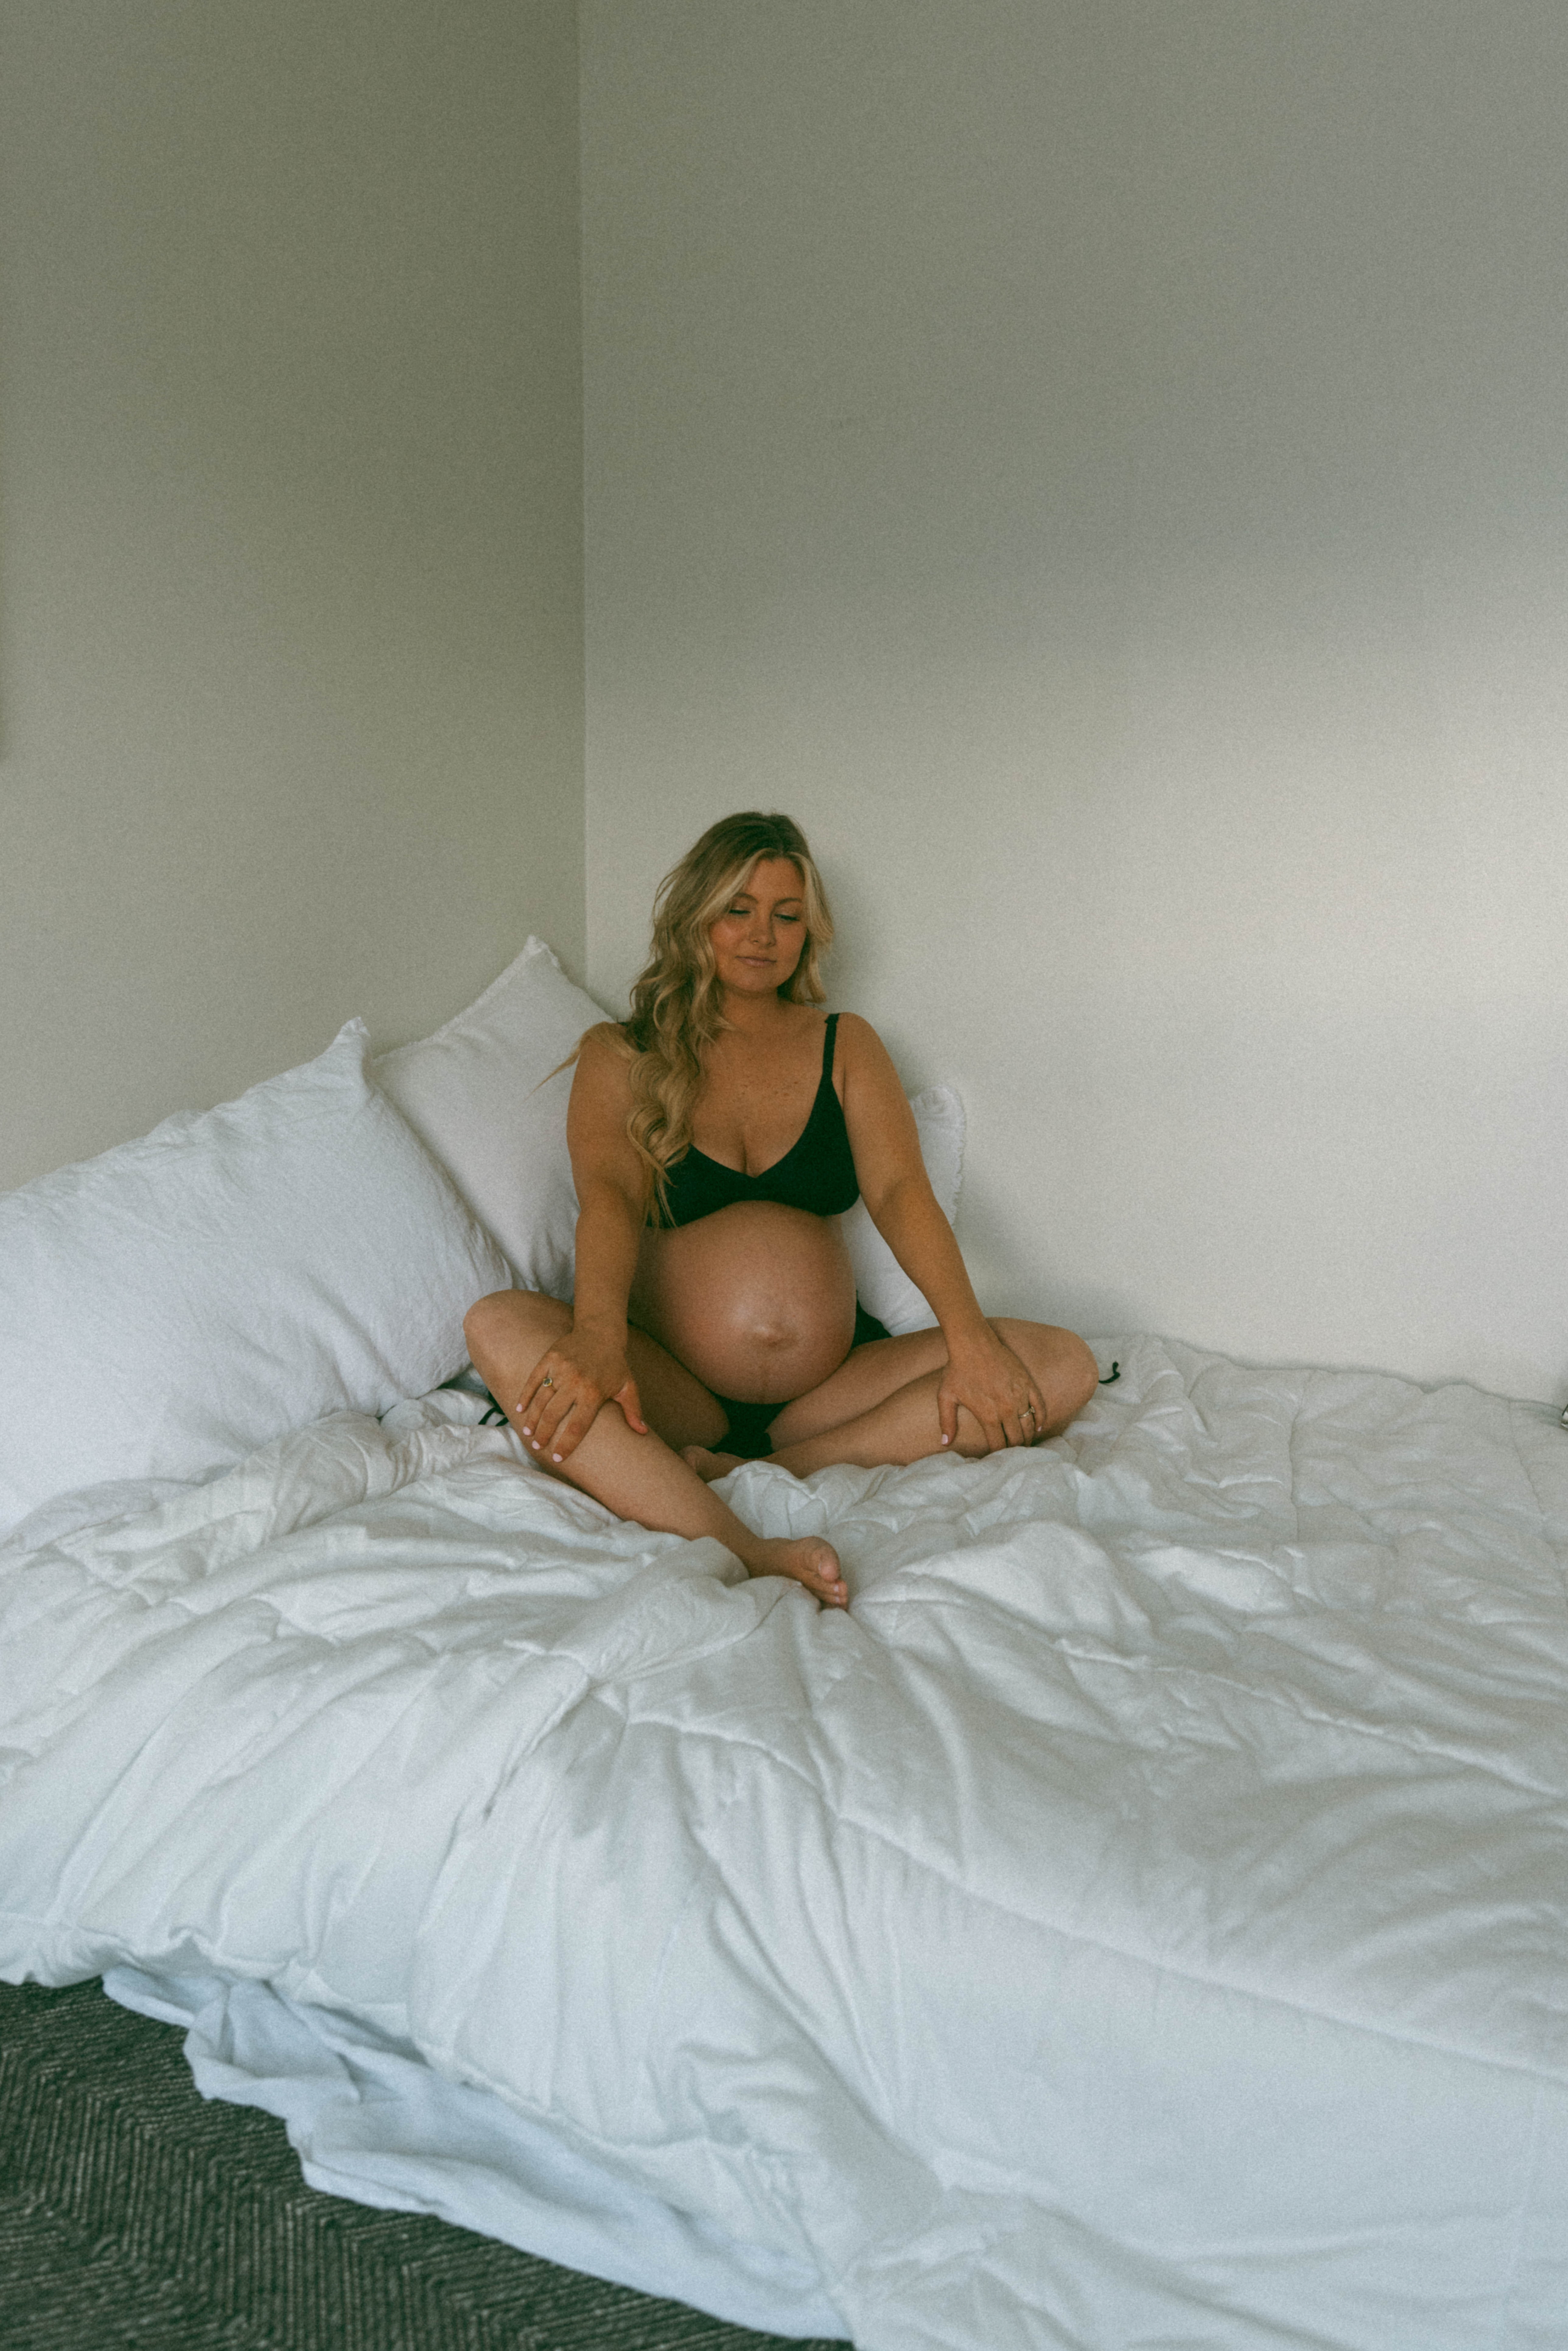 editorial maternity shoot with the woman sitting on a bed wearing black intimates 